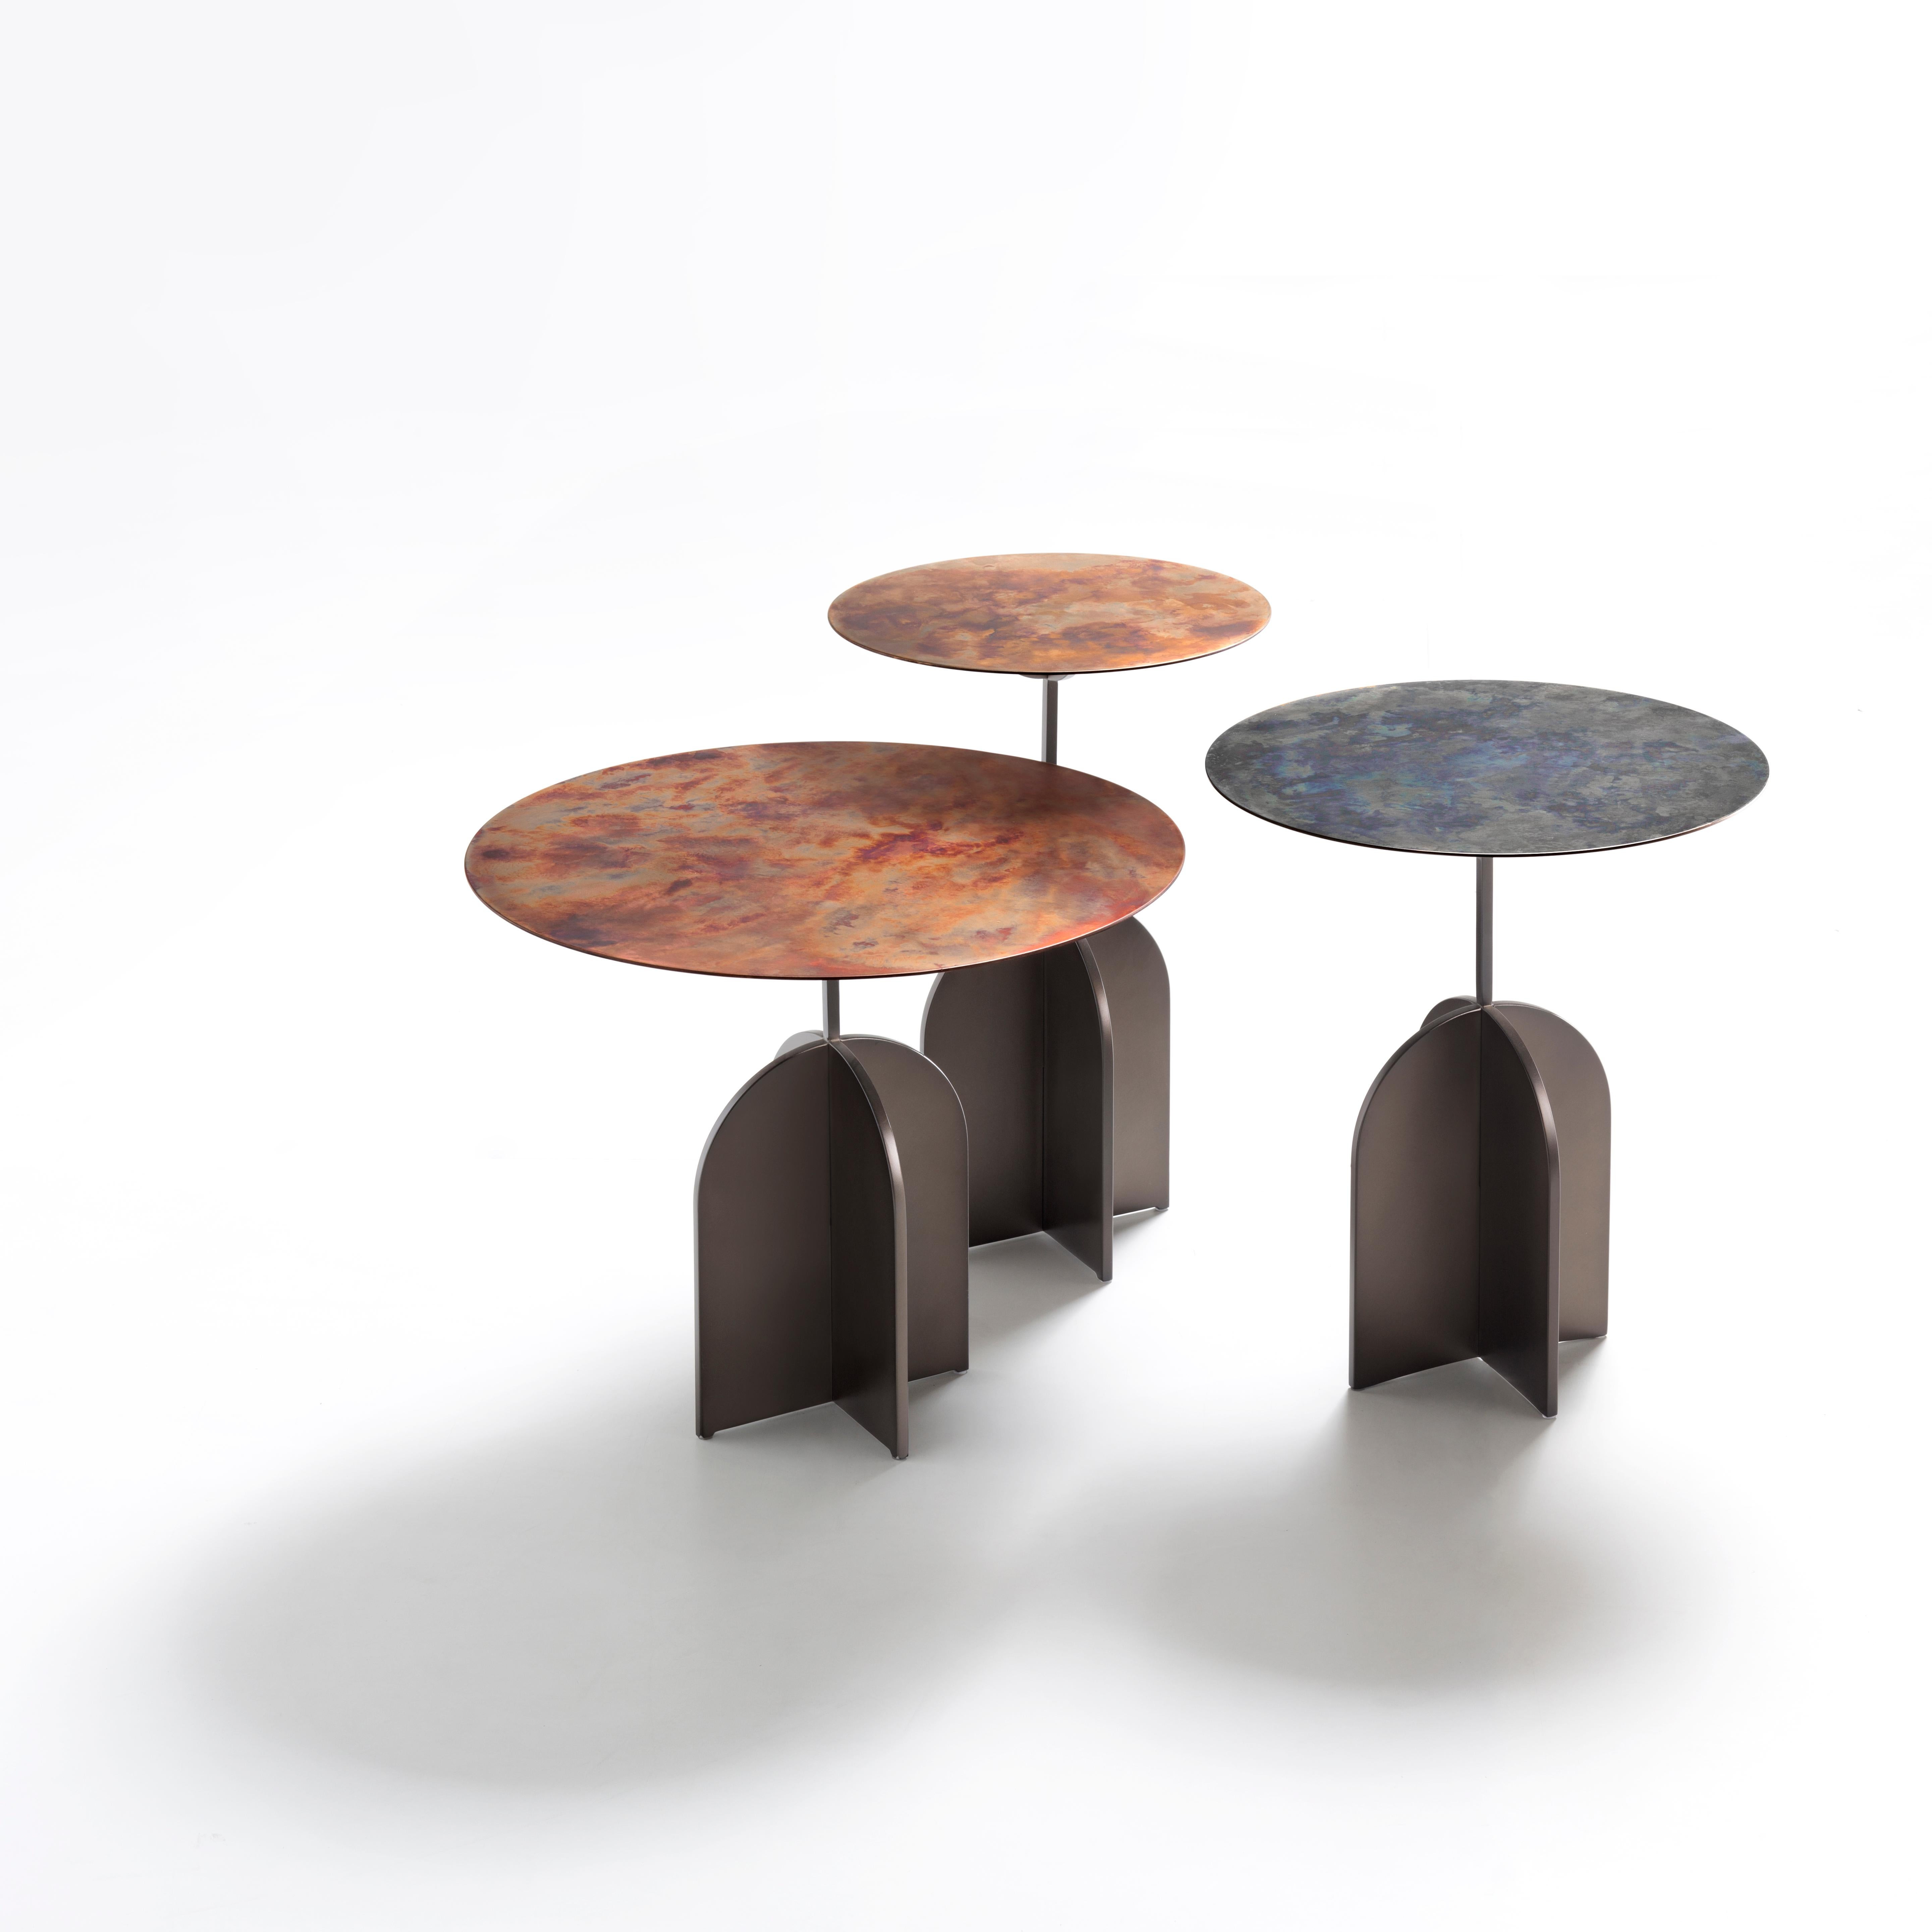 Decisive geometries for a table characterized by the superimposition of three apparently-contrasting elements. The robust cross-shaped base anchors the structure to the ground while the thin round top rests on a slender stem, like a delicate leaf